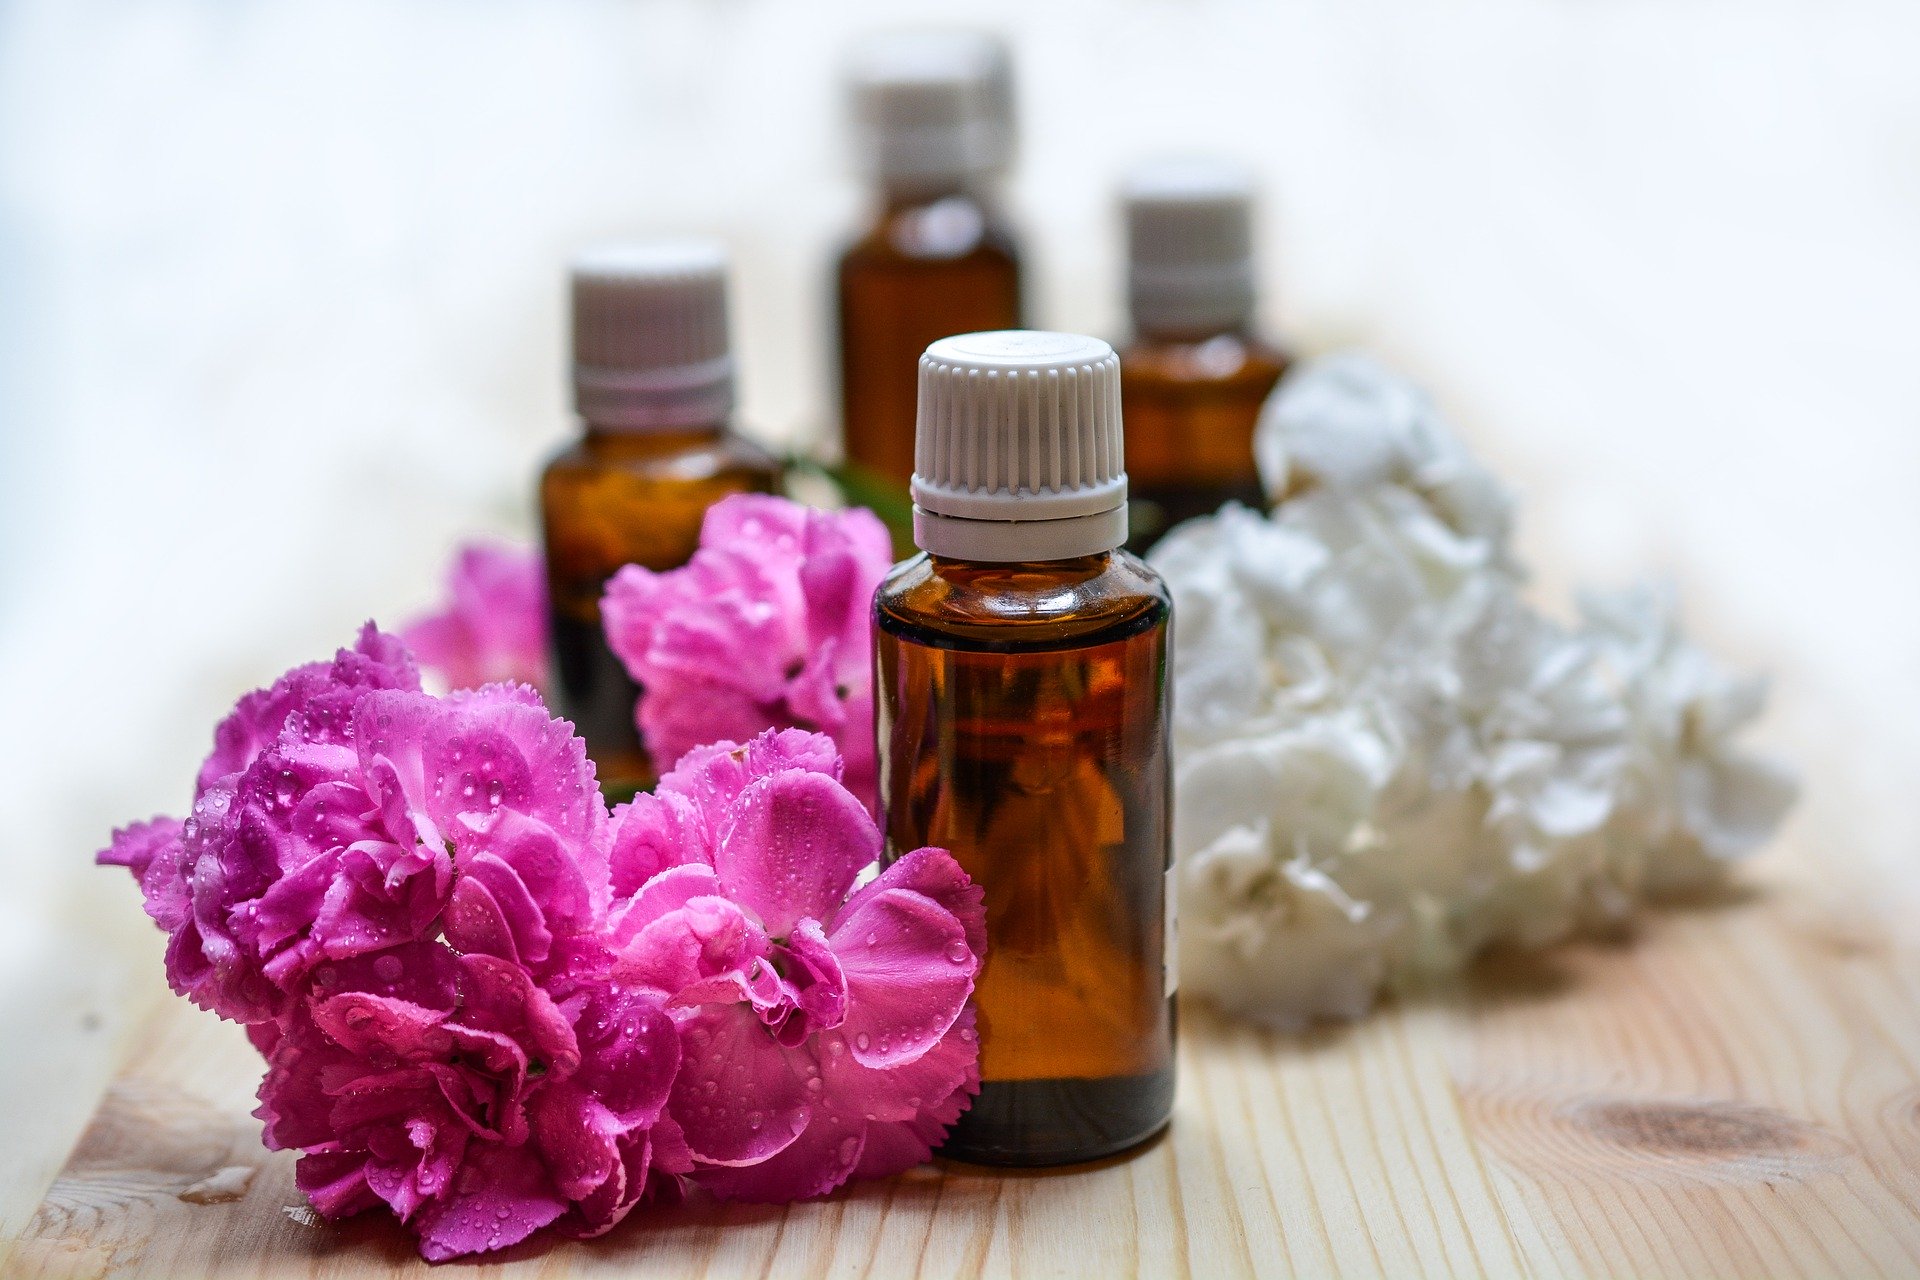 Bottles of essential oils with flowers.